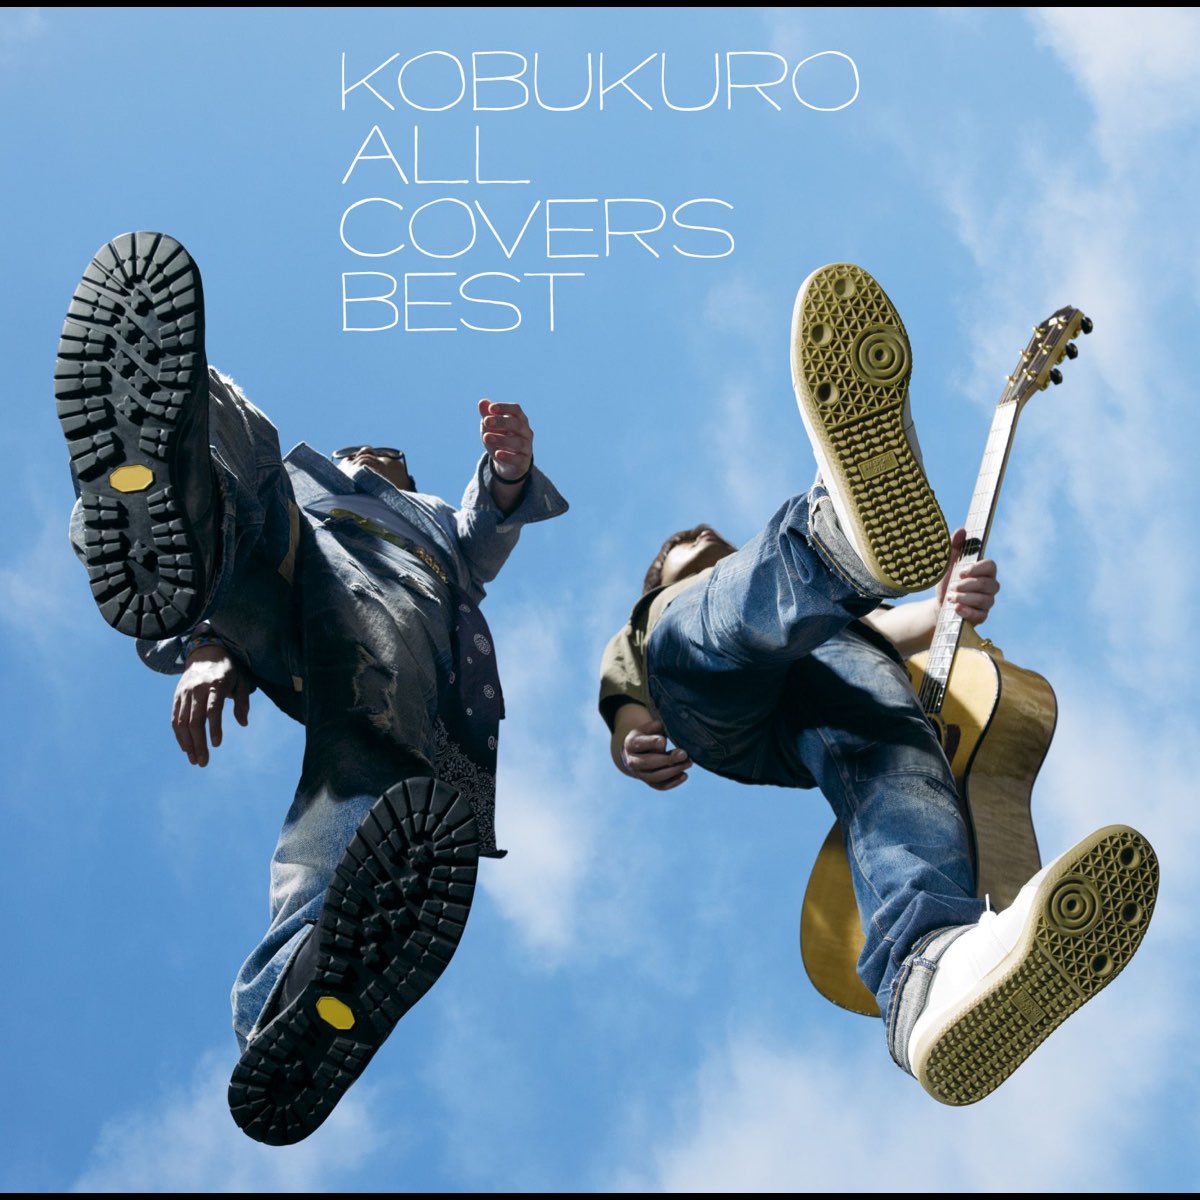 Best cover. Best Covers. Фотографии best-Covers. コブクロ all Singles best Disc 1.